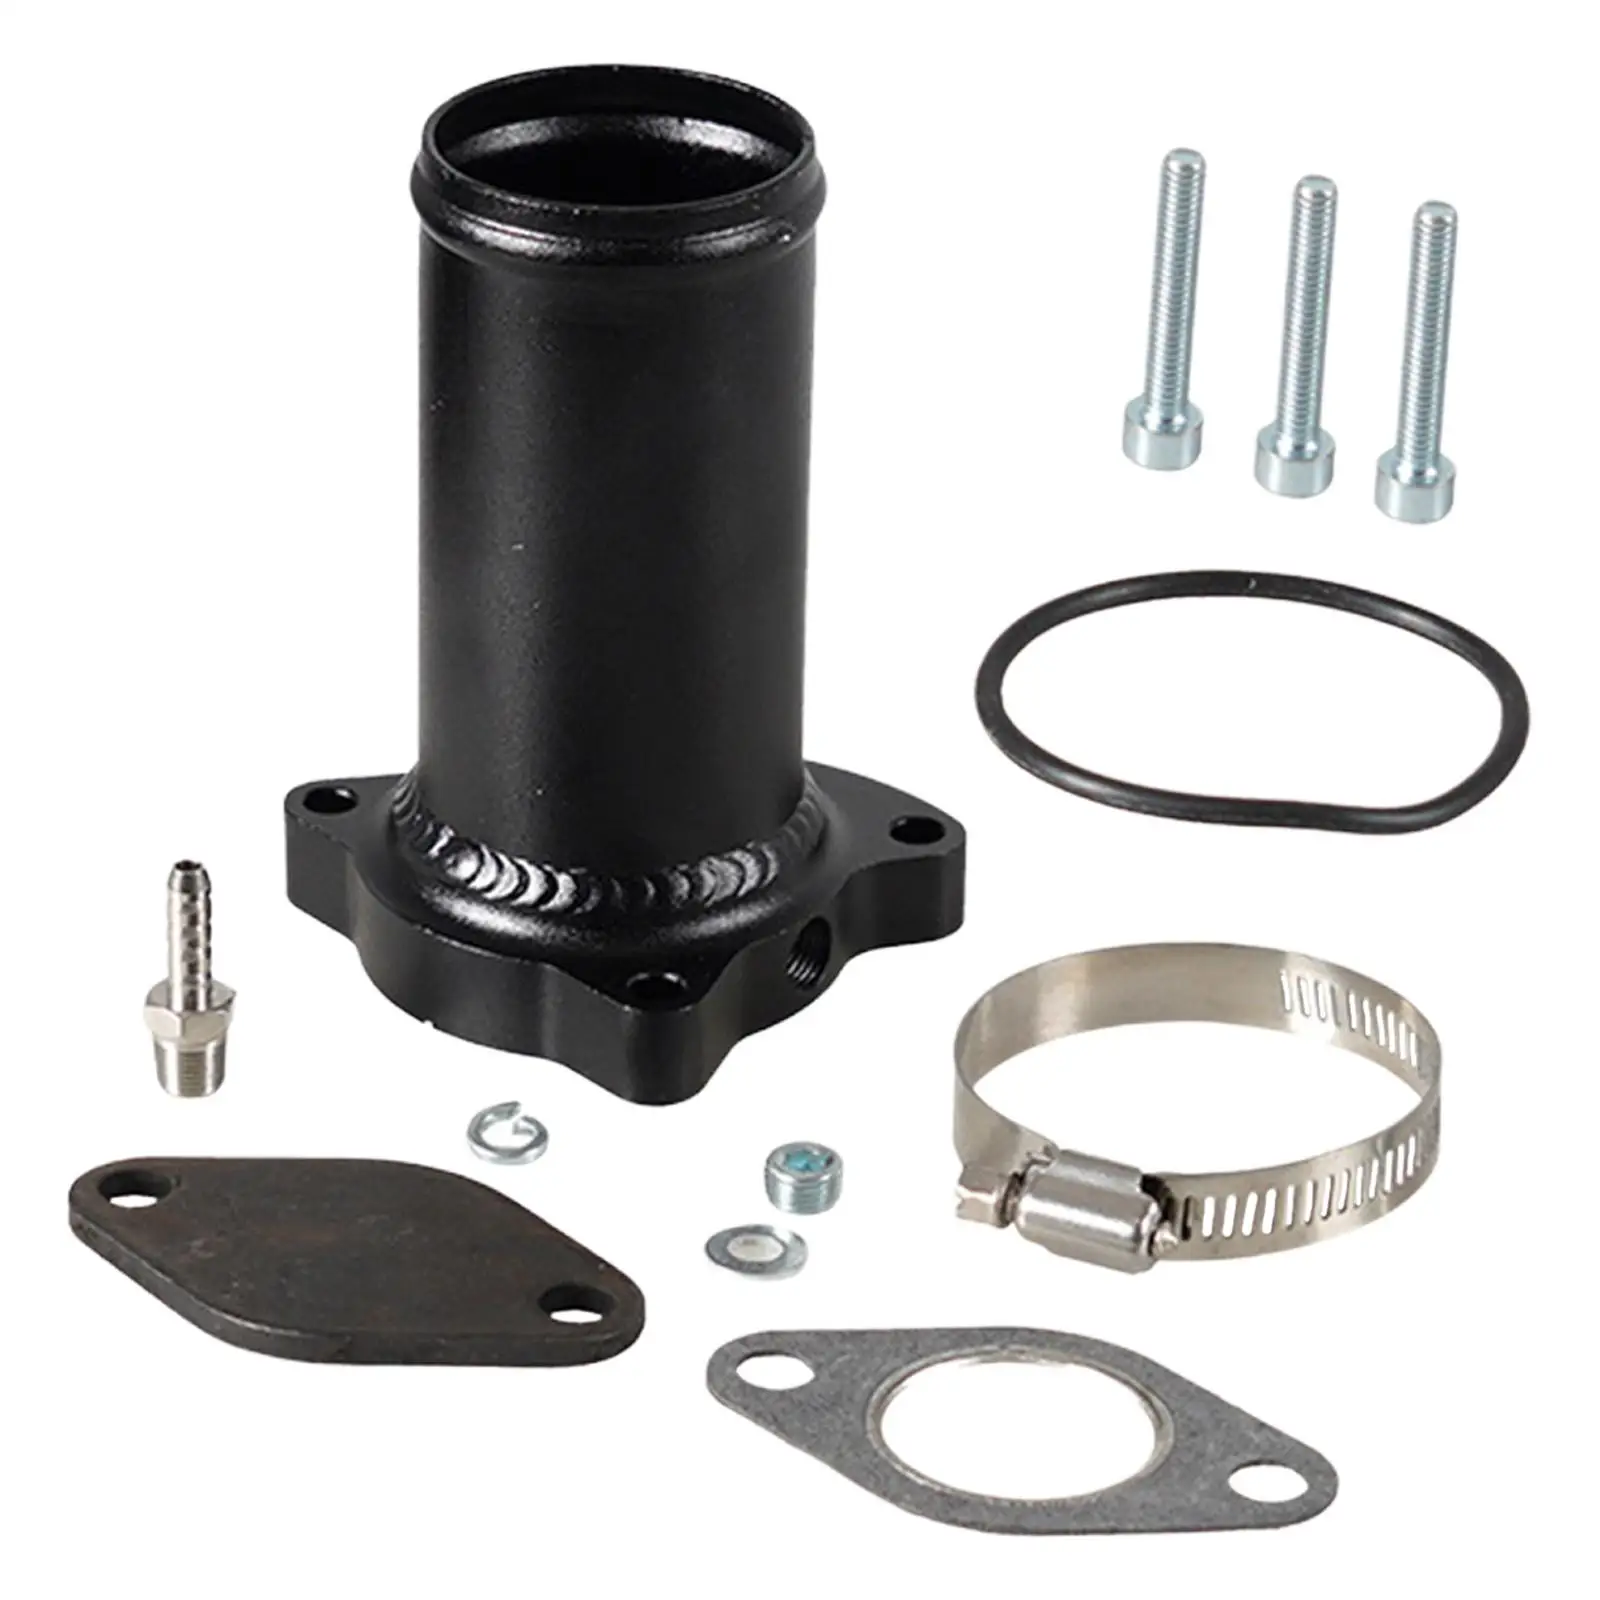 Egr Delete Kit Fit for 1.9 8V Tdi Ve 90 110 Spare Parts Easy to Install High Performance